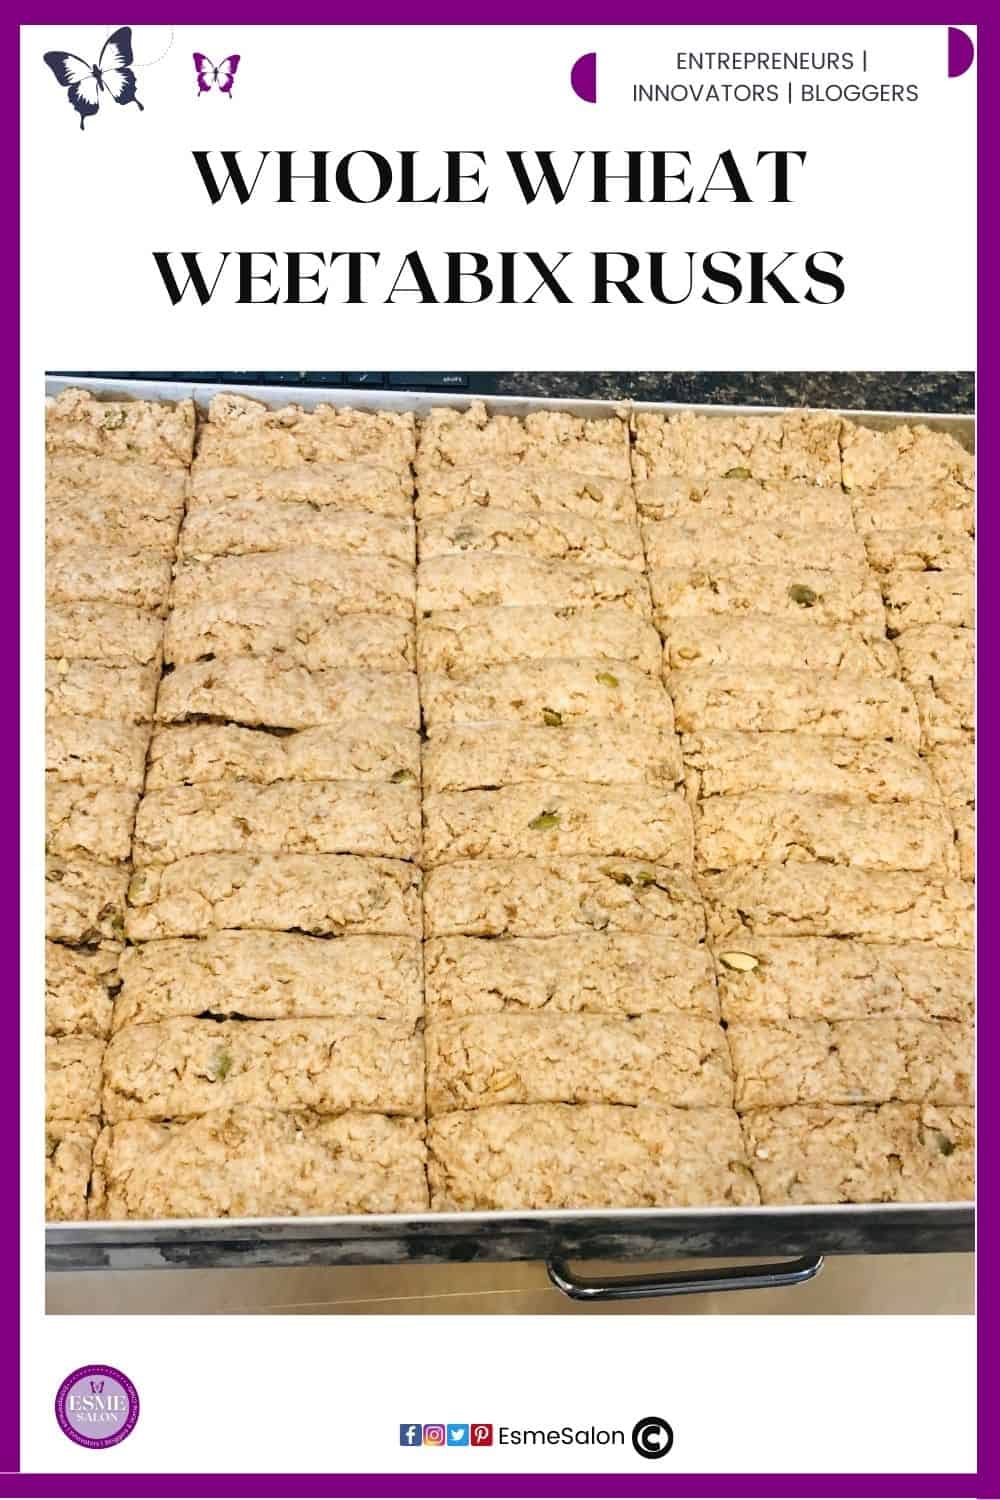 an image of a baking tray filled with Whole Wheat Weetabix Rusks ready to be baked